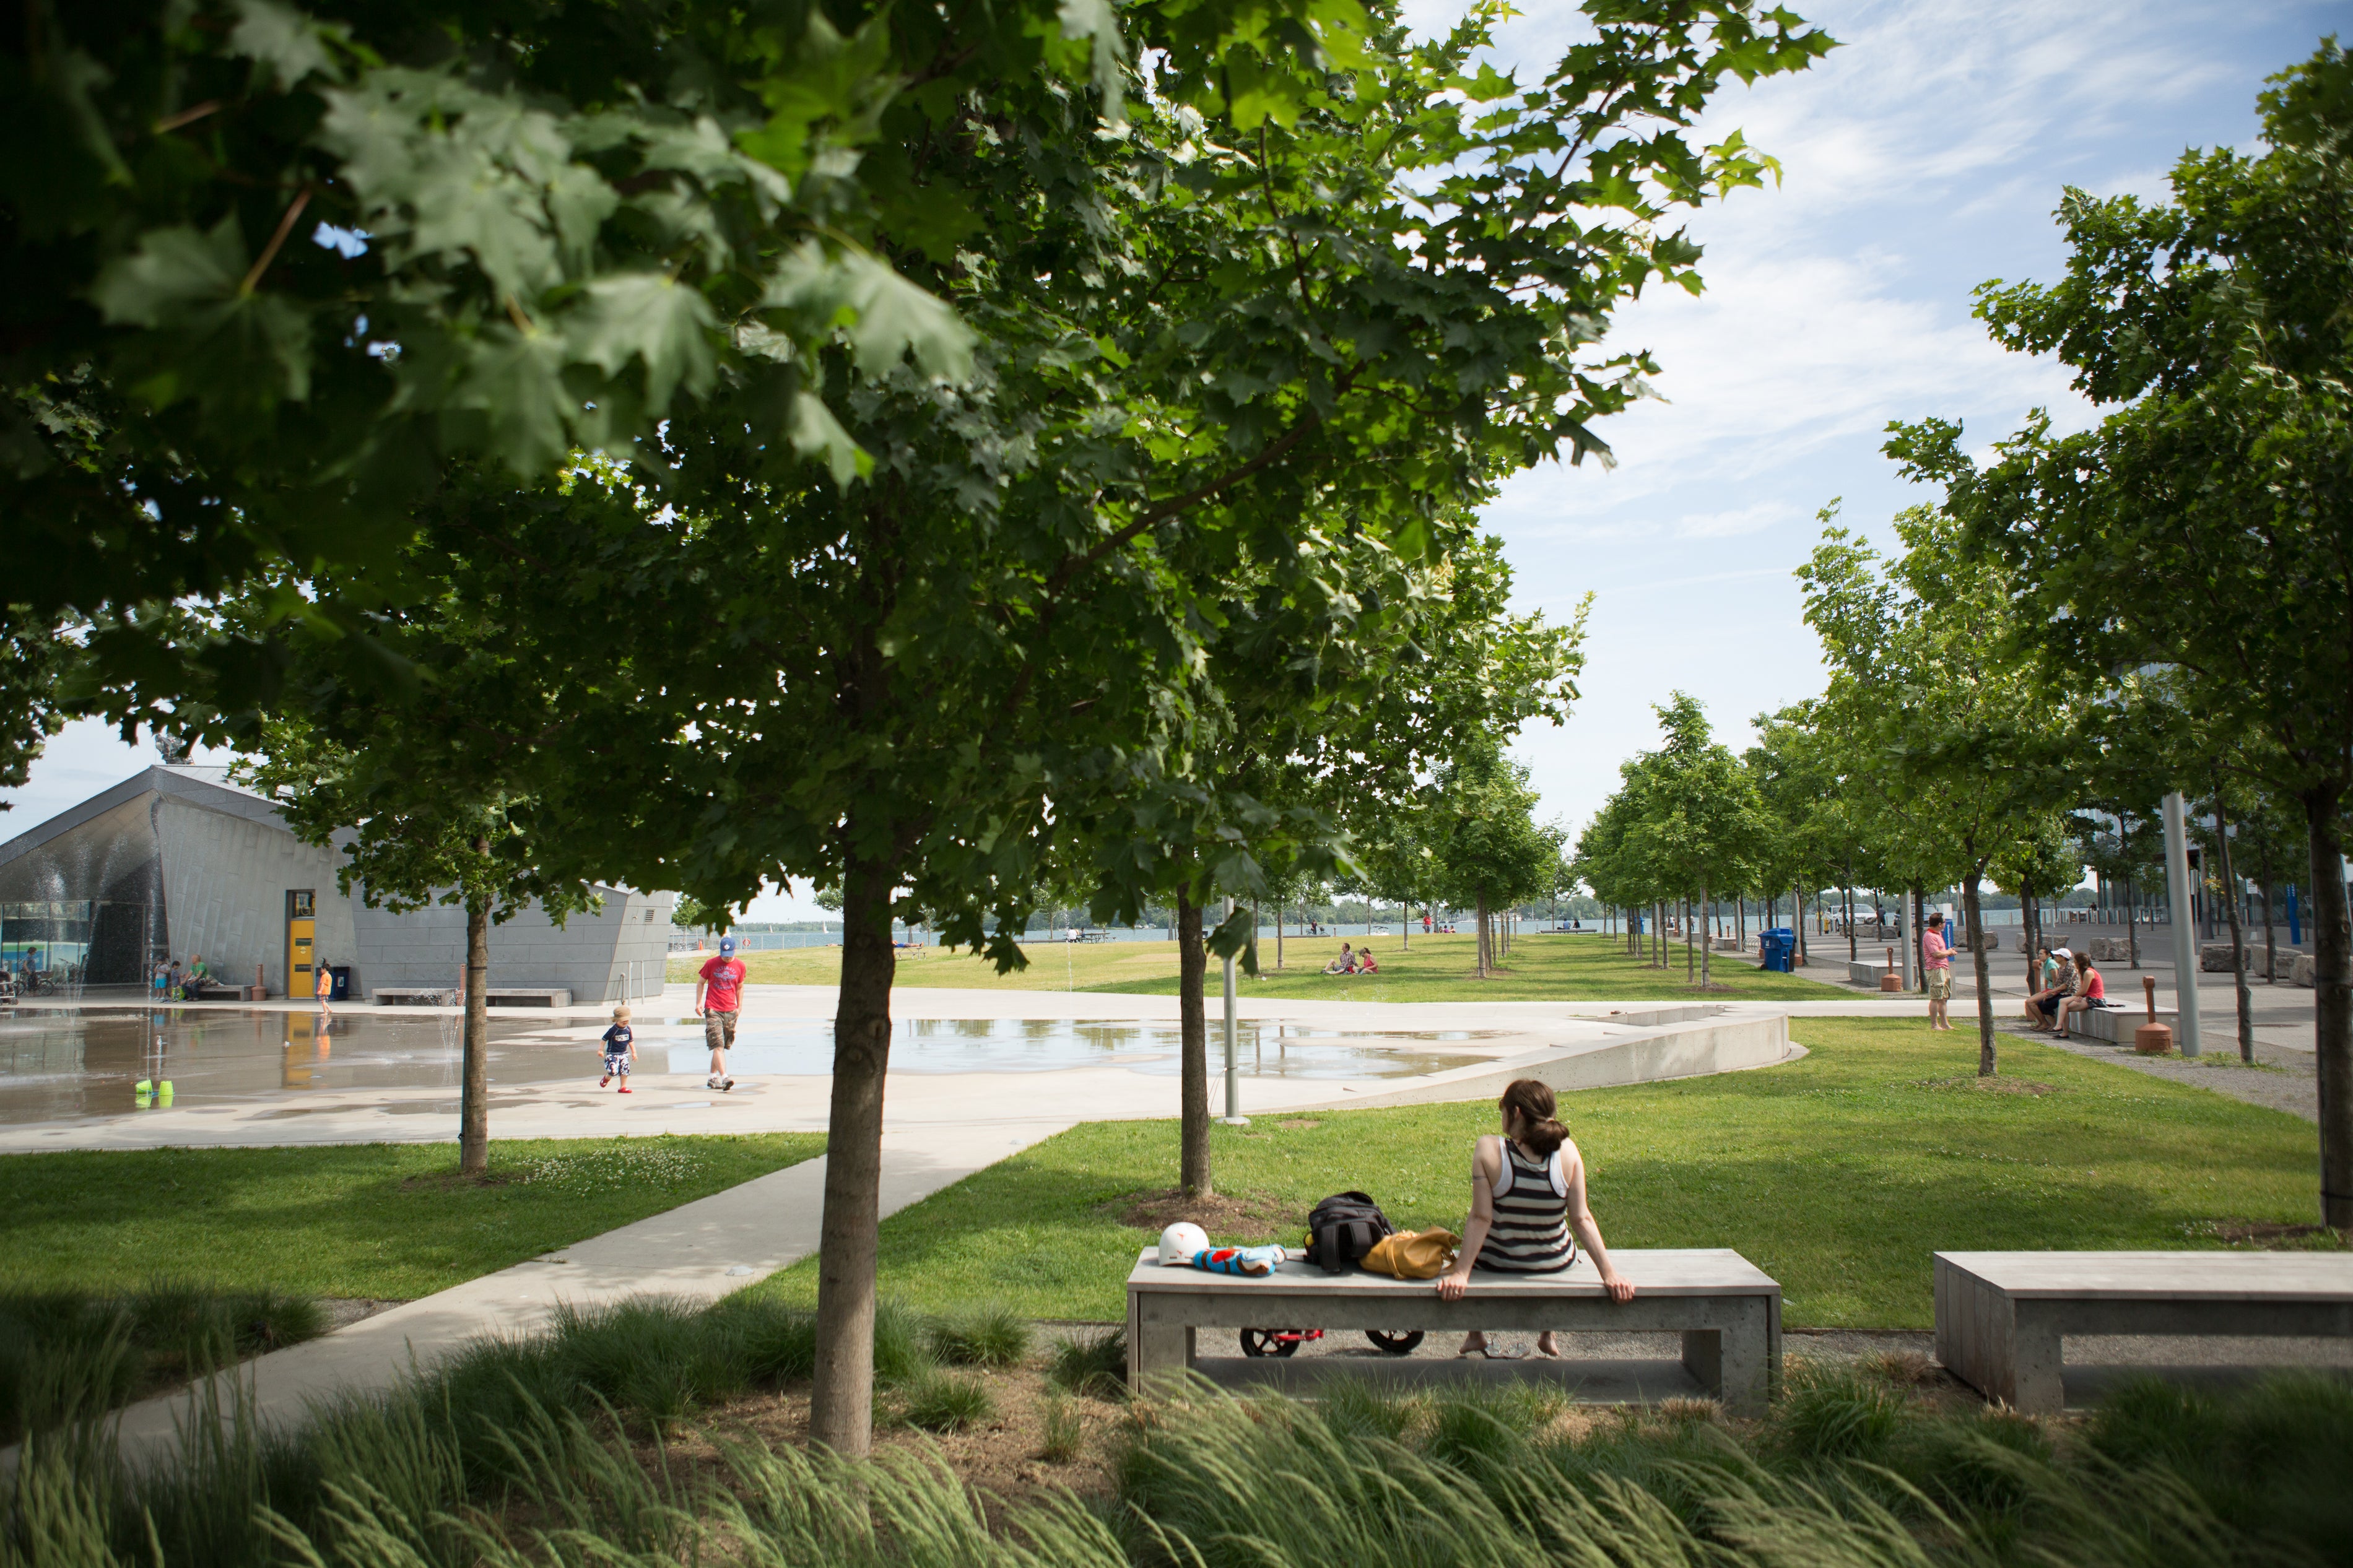 people sitting on a park bench next to a shaded area and splash pad